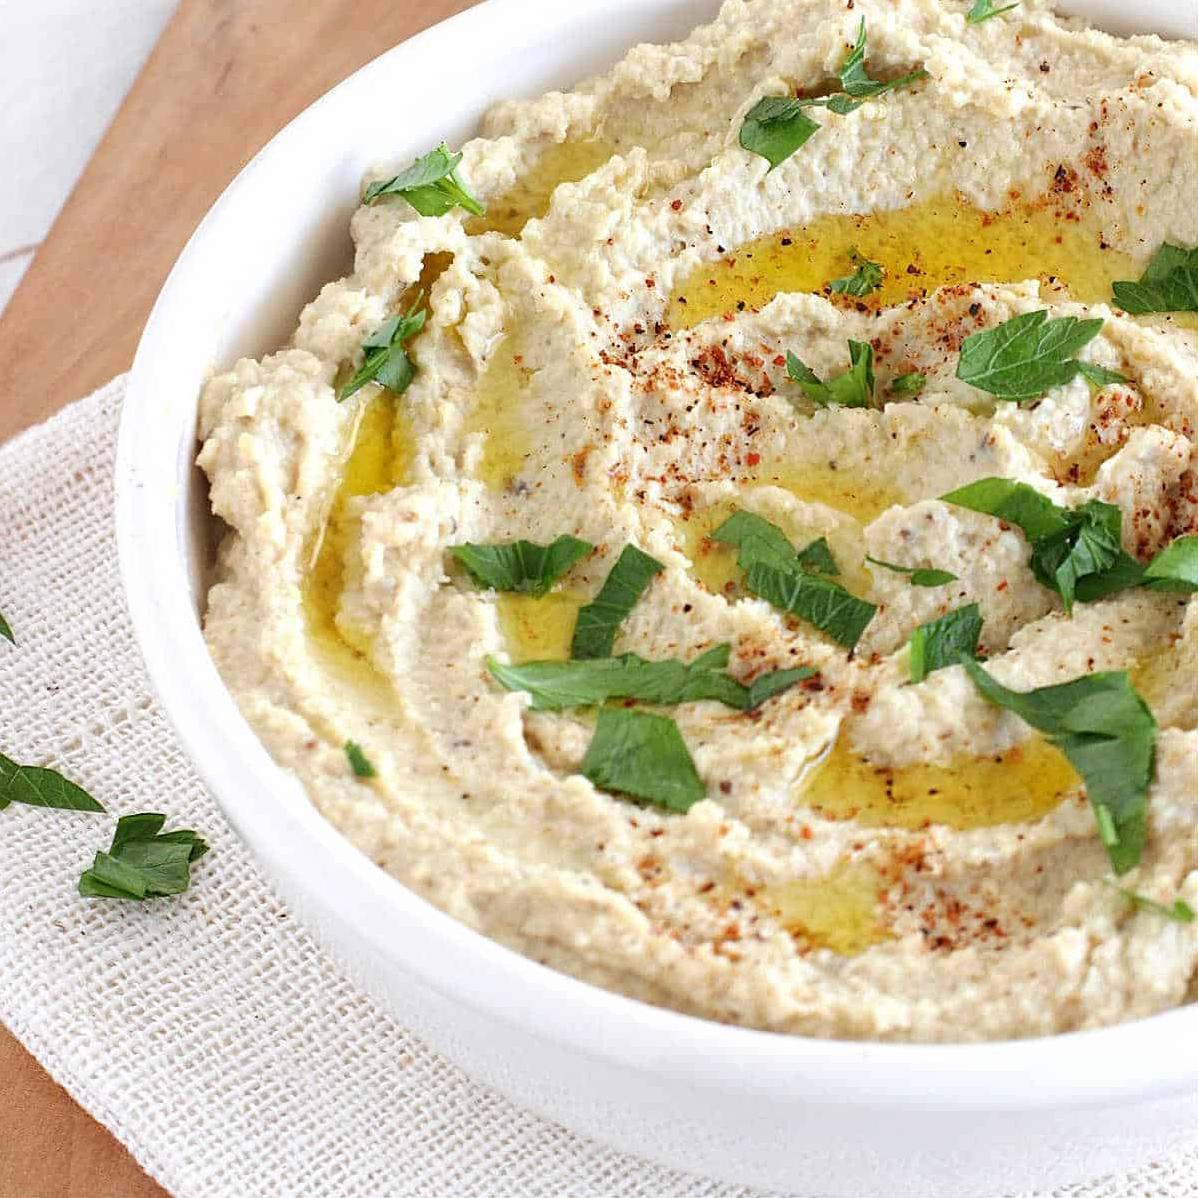  This dip is perfect for game day or any party appetizer.